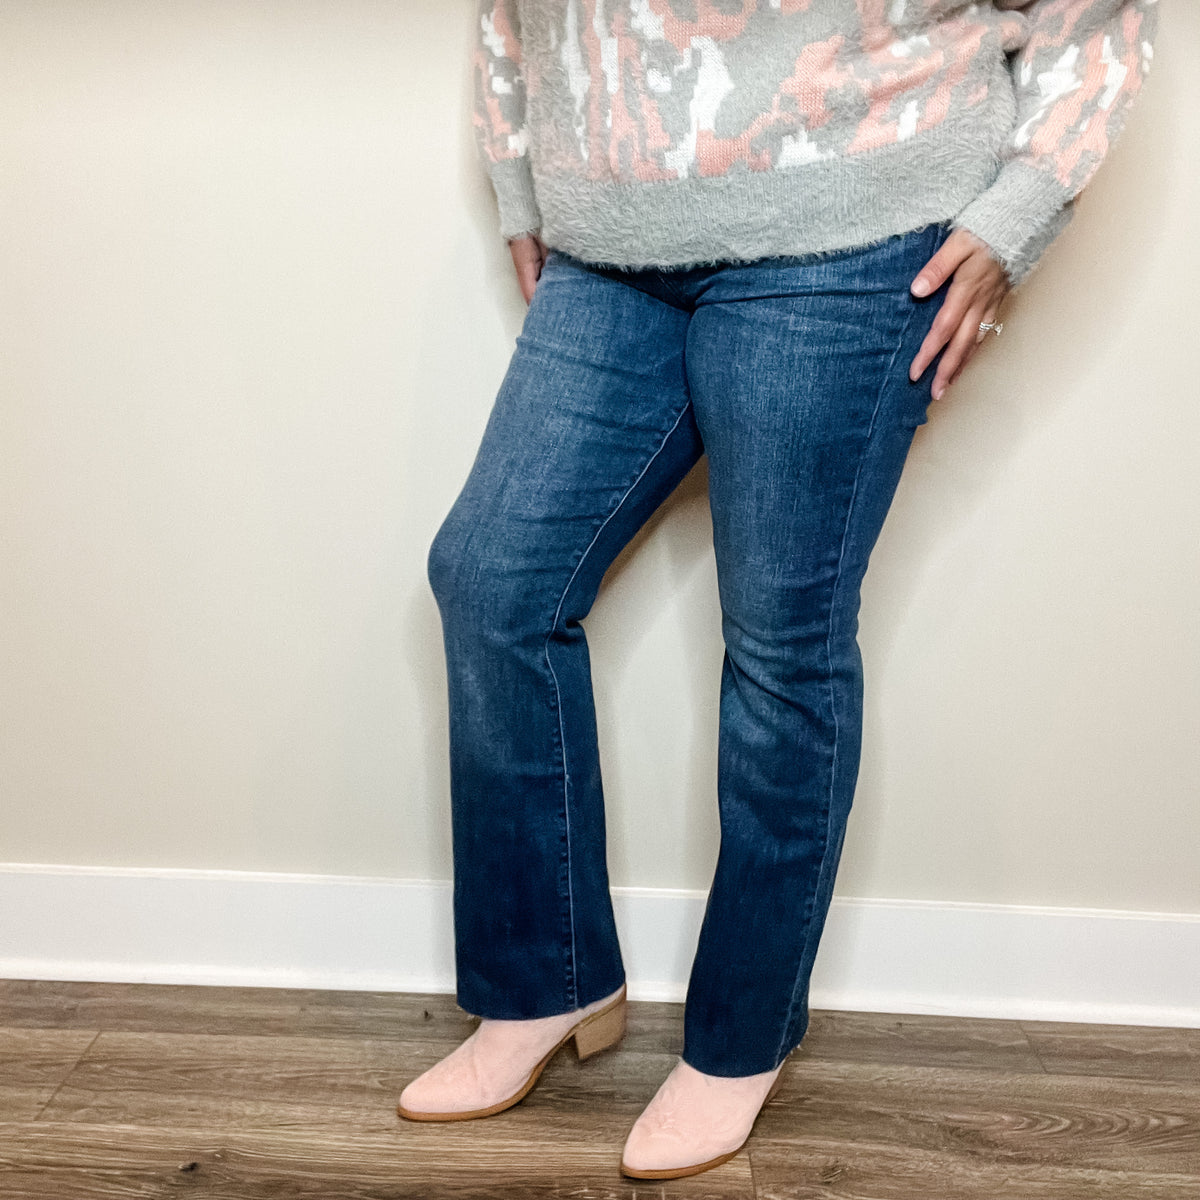 Judy Blue "The Right Stuff" Bootcut jeans